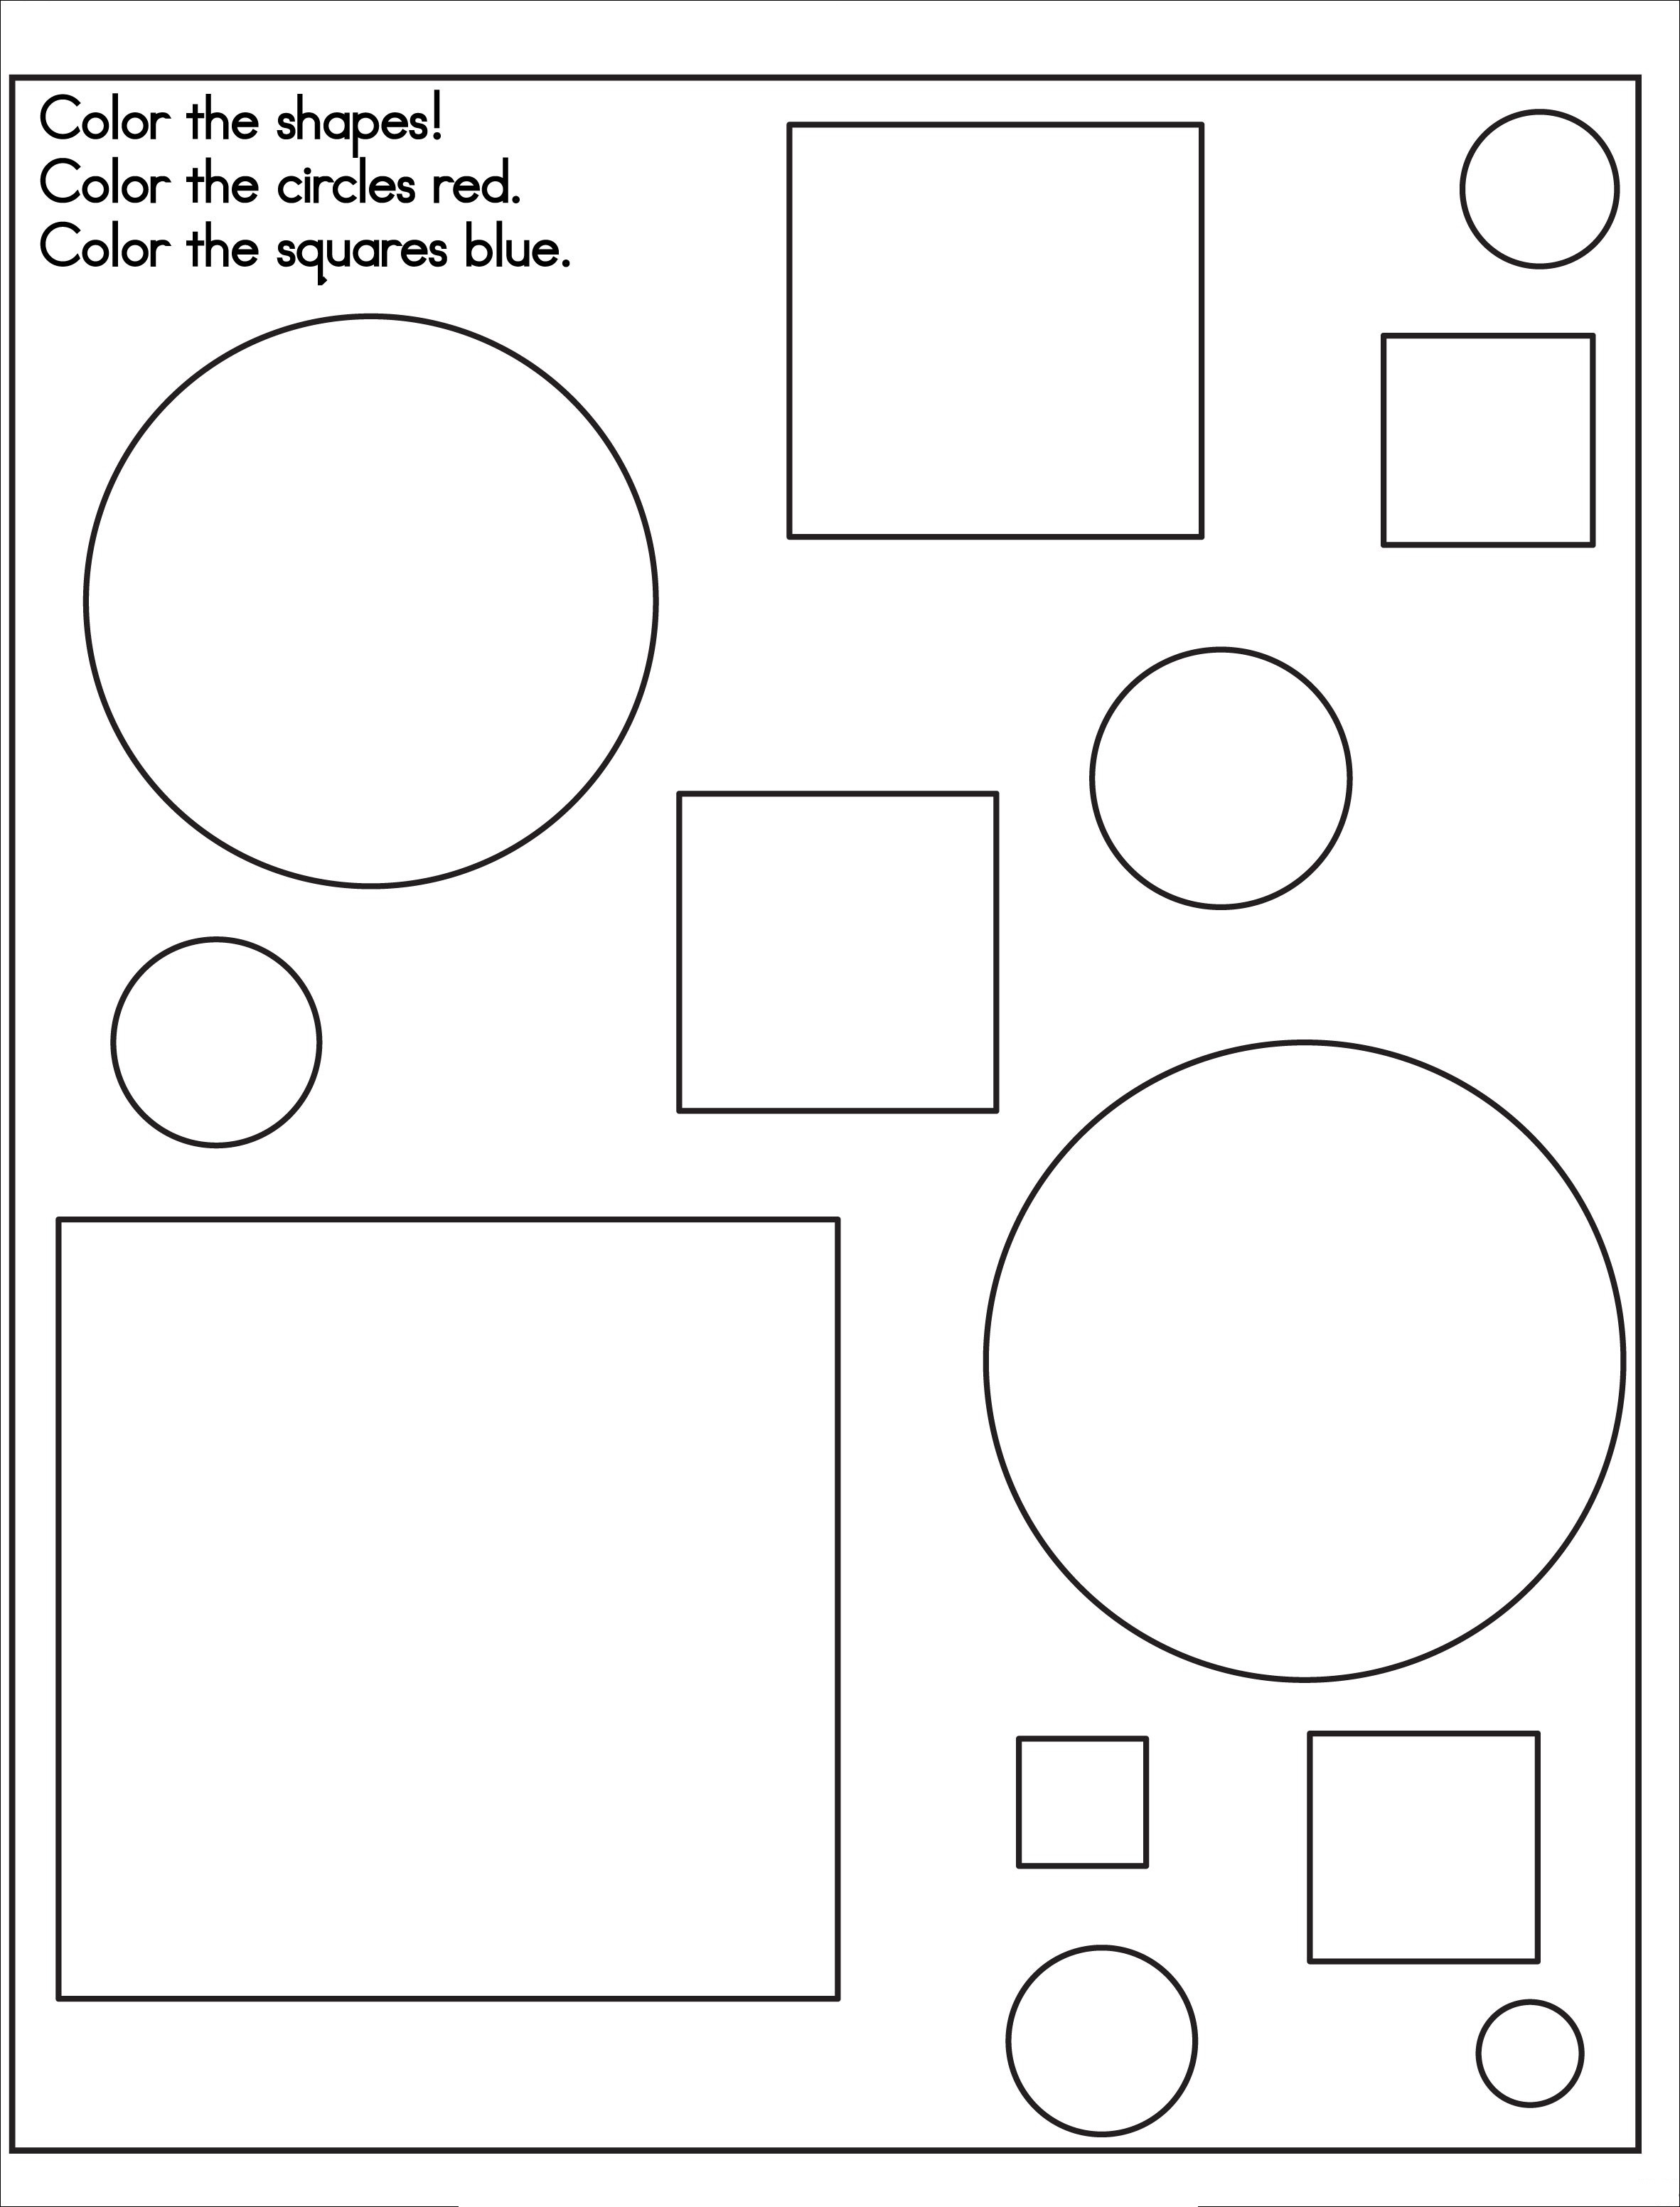 coloring-shapes-printables